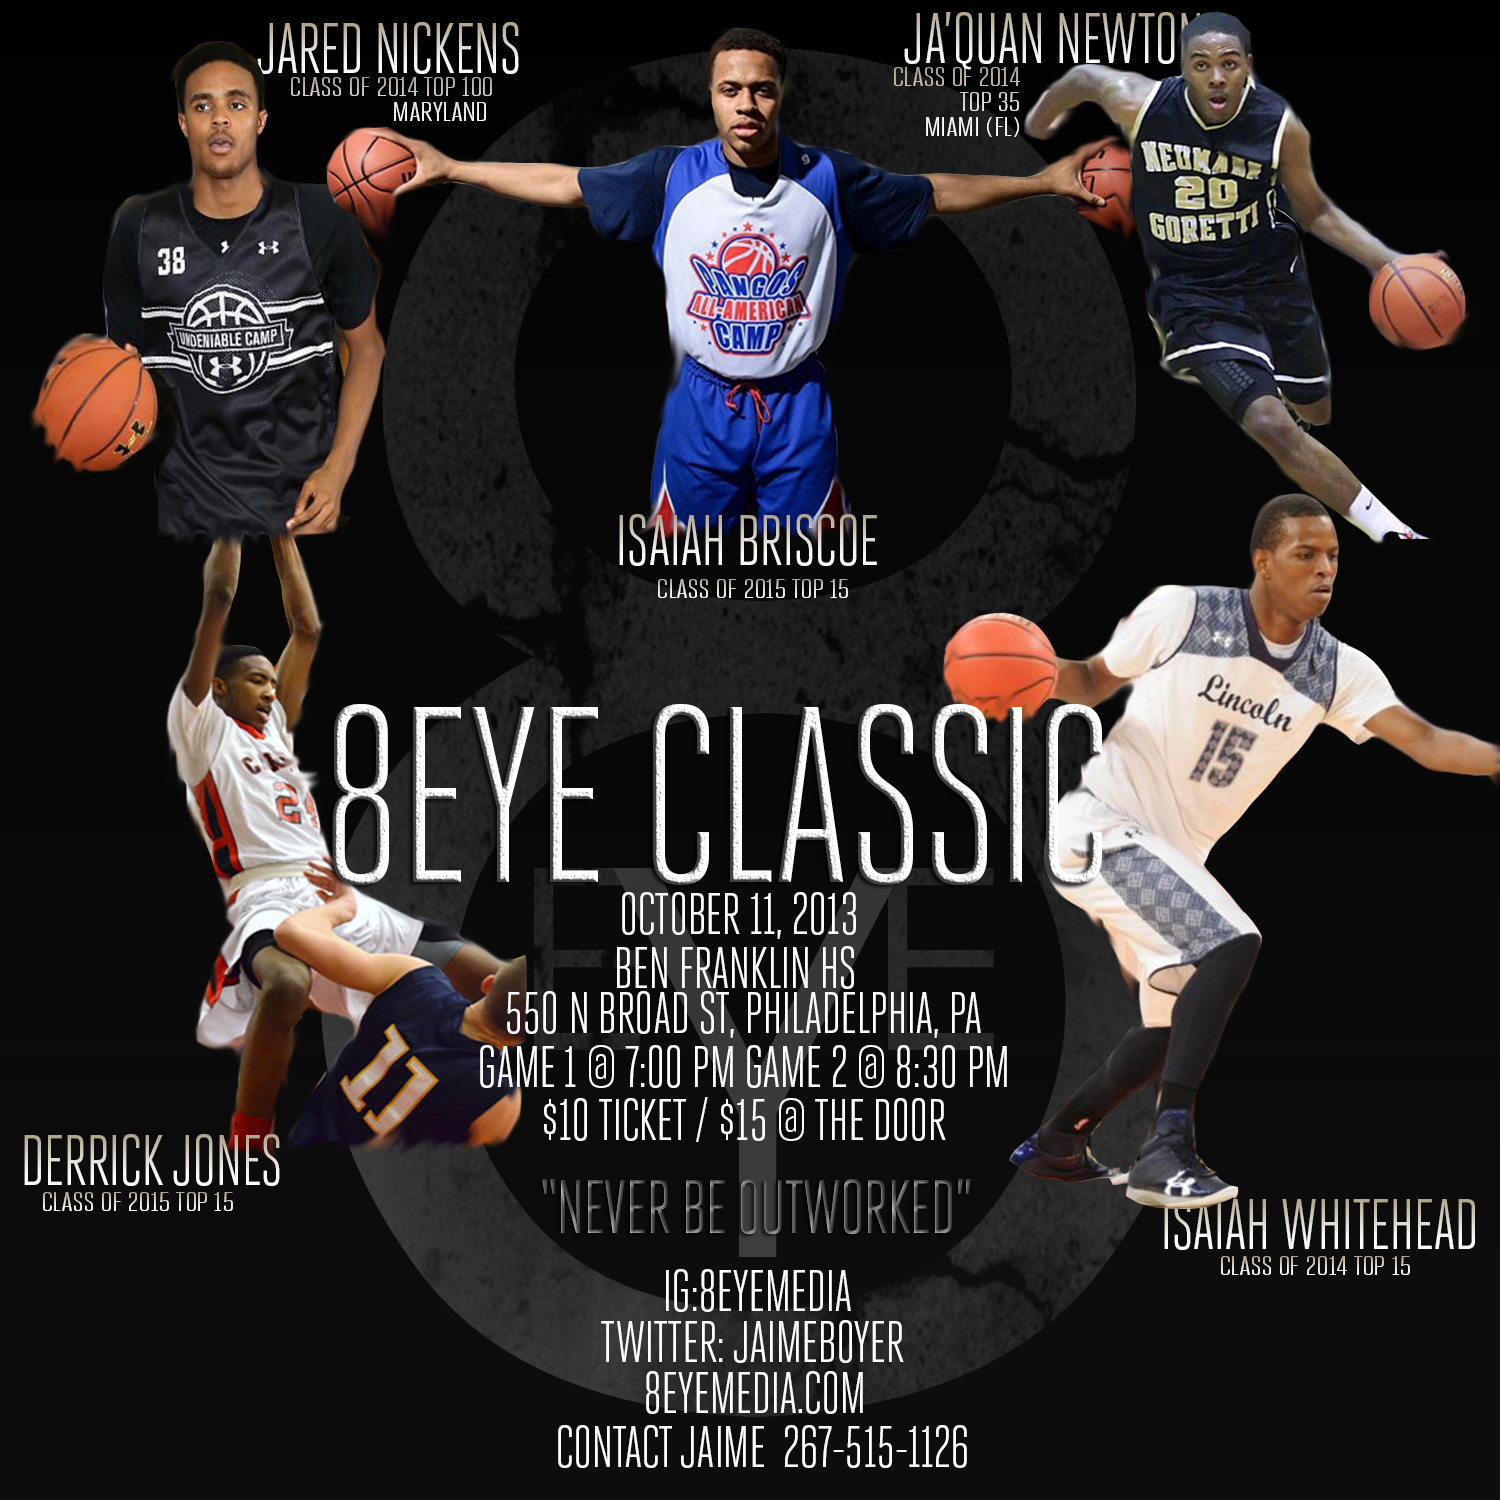 1st-annual-8eye-classic-at-ben-franklin-hs-on-october-11-at-7pm-phila-pa-HHS1987-2013 1st Annual 8Eye Classic at Ben Franklin HS on October 11 at 7pm (Phila, Pa)  